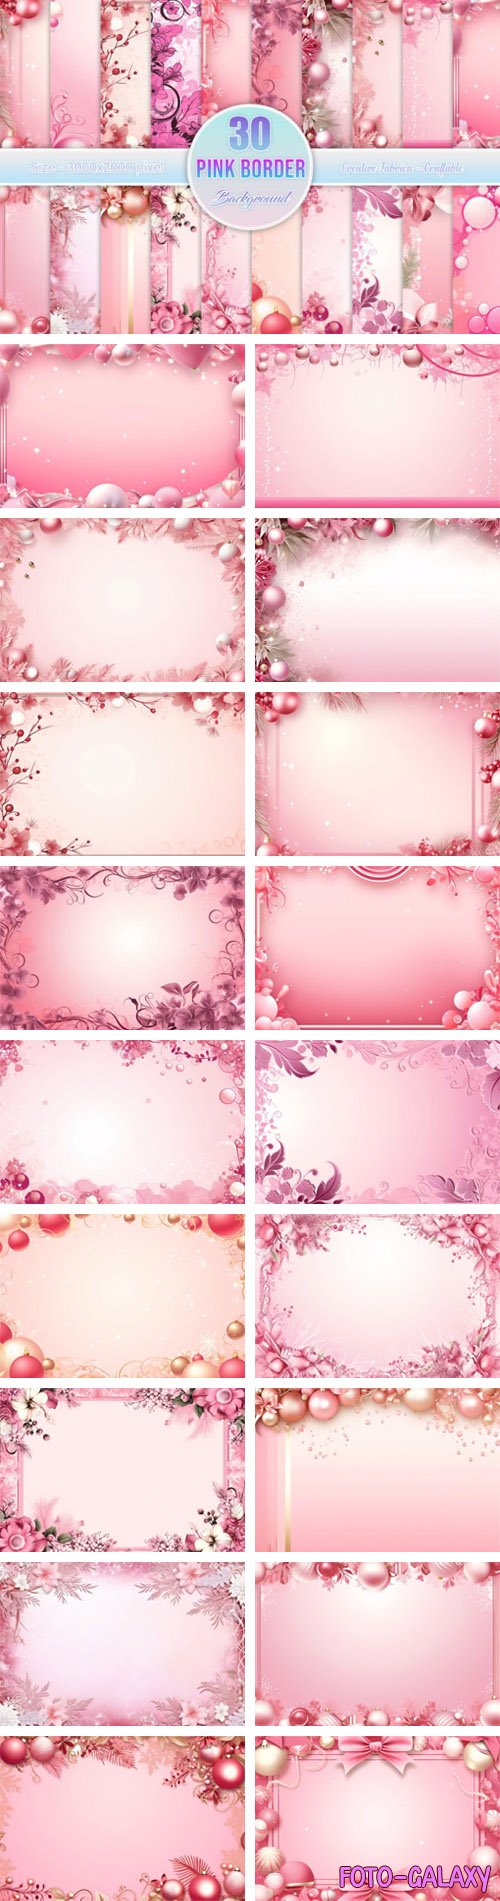 Pink Decorative Borders - 30+ Backgrounds